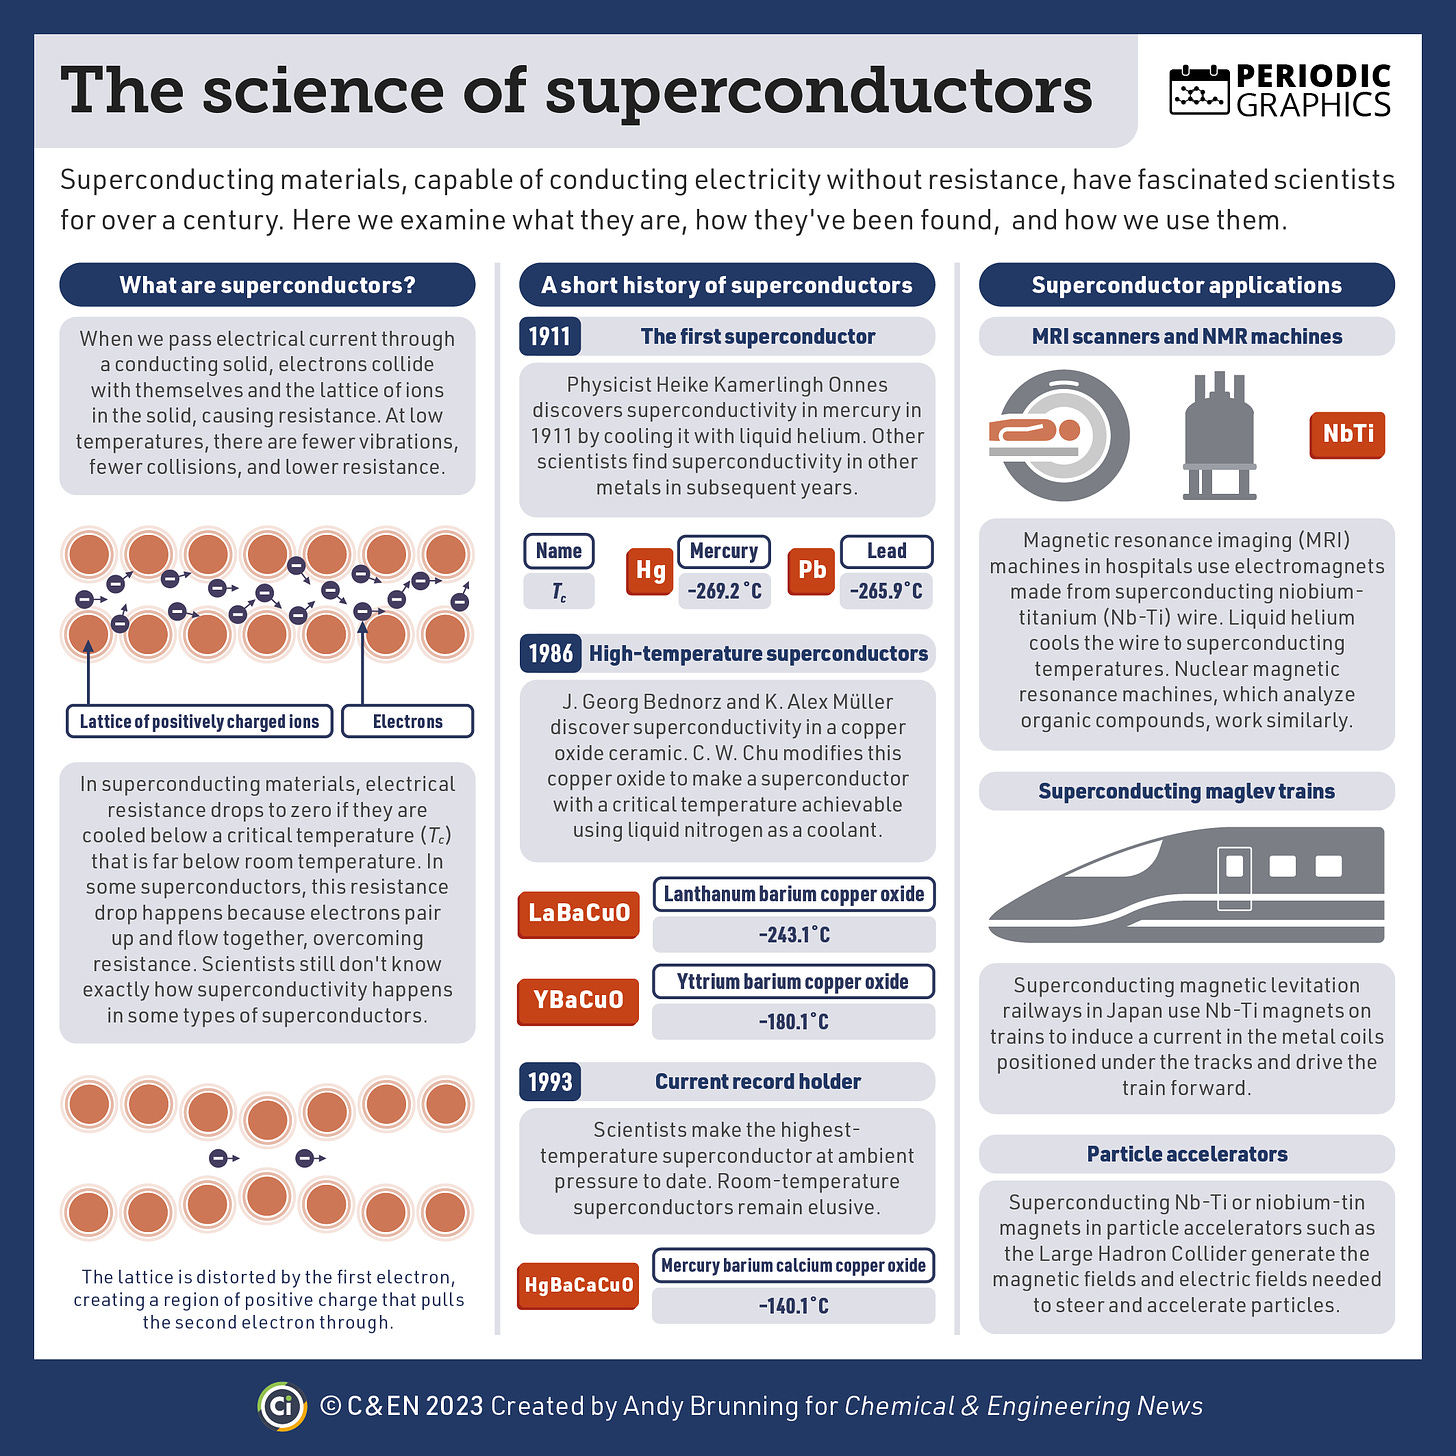 Three-column infographic on superconductors. 
The first column explains the premise of electrical resistance and that superconductors are materials in which resistance drops to zero below a certain critical temperature. Some materials act as superconductors because electrons pair up and flow together, overcoming resistance. For other materials, we don’t know why they act as superconductors.
The second column highlights some key milestones in superconductor history. In 1911, Heike Kamerlingh Onnes discovered superconductivity in mercury by cooling it with liquid helium. J. Georg Bednorz and K. Alex Müller discovered superconductivity in a copper oxide ceramic, which C. W. Chu modified to make a material that superconducted at a temperature achievable using liquid nitrogen as a coolant. The current record-holding superconductor at ambient pressure superconducts at –140.1 ˚C. 
The third column highlights applications of superconductors. These include magnetic resonance imaging machines.